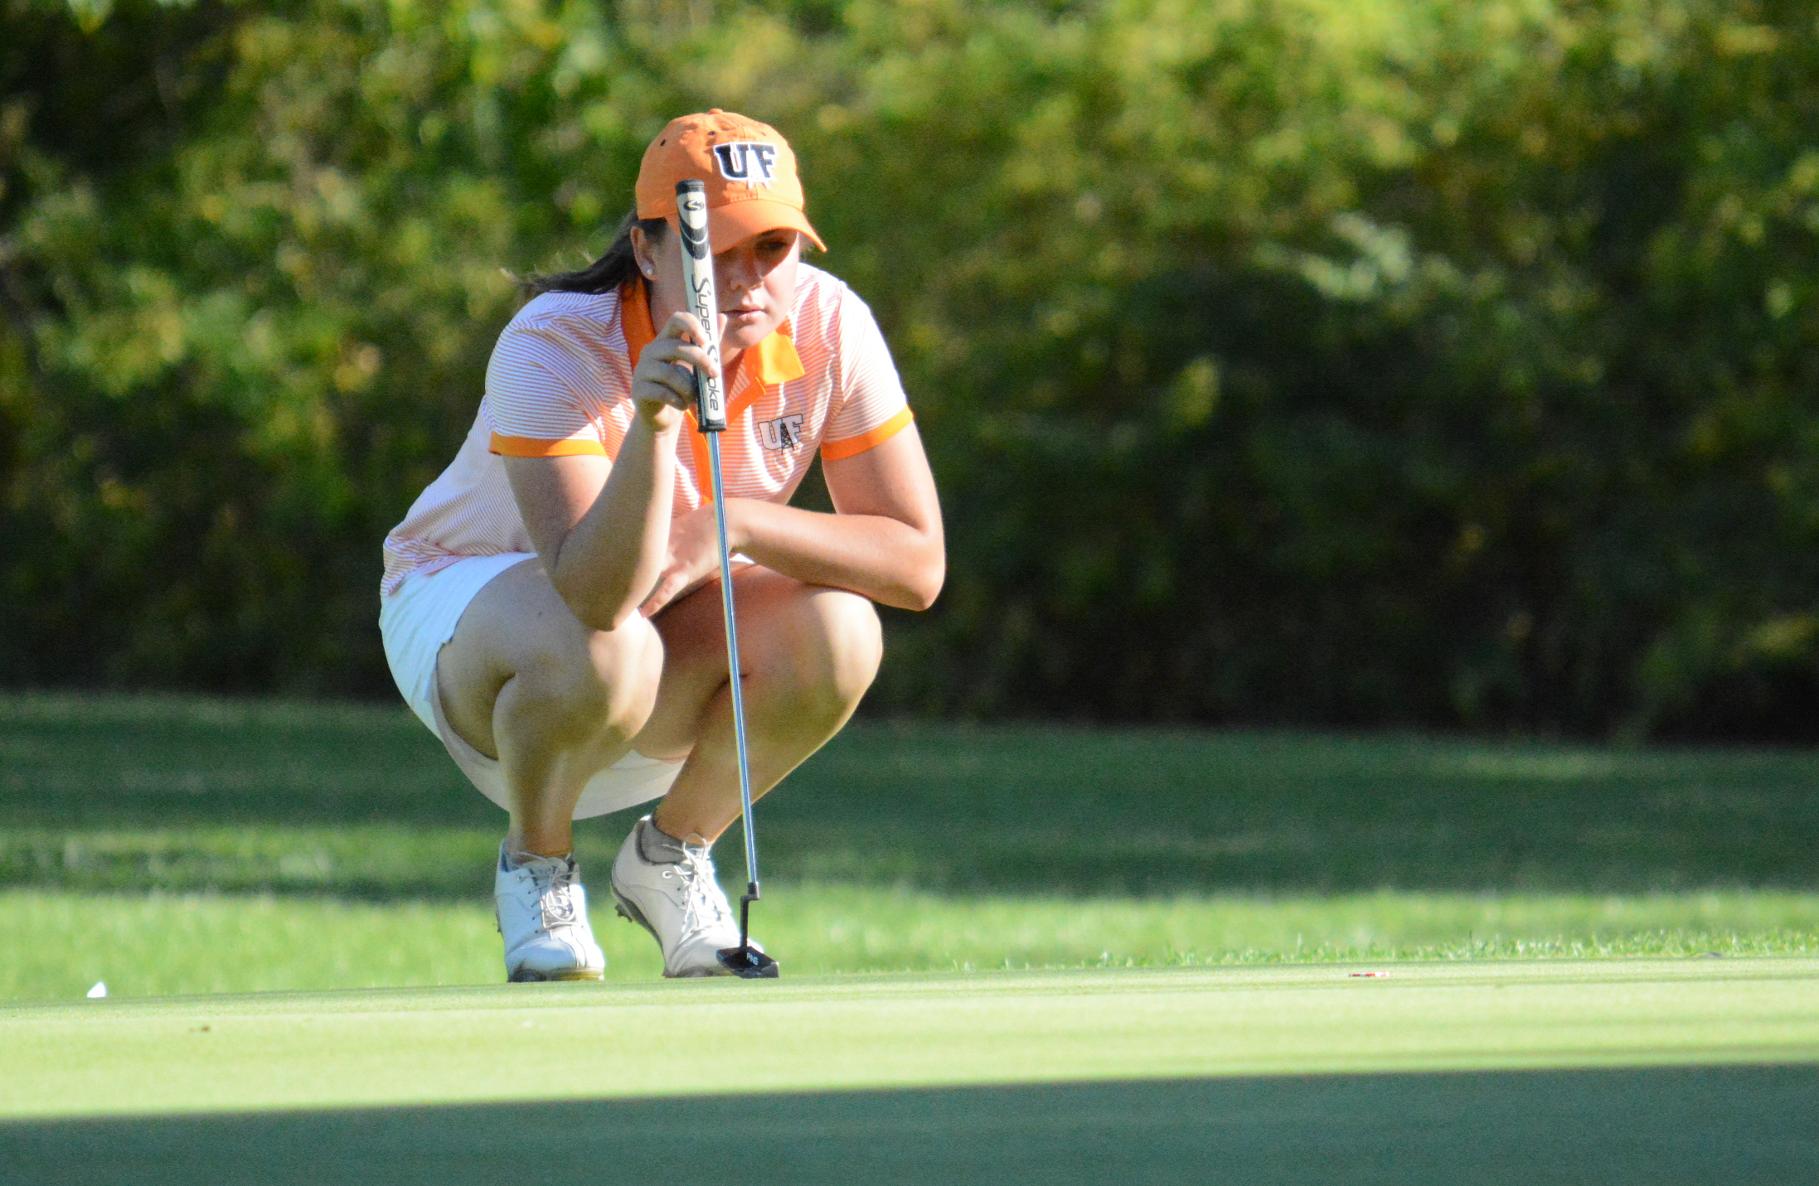 Wipper Leads After Round One in Nashville